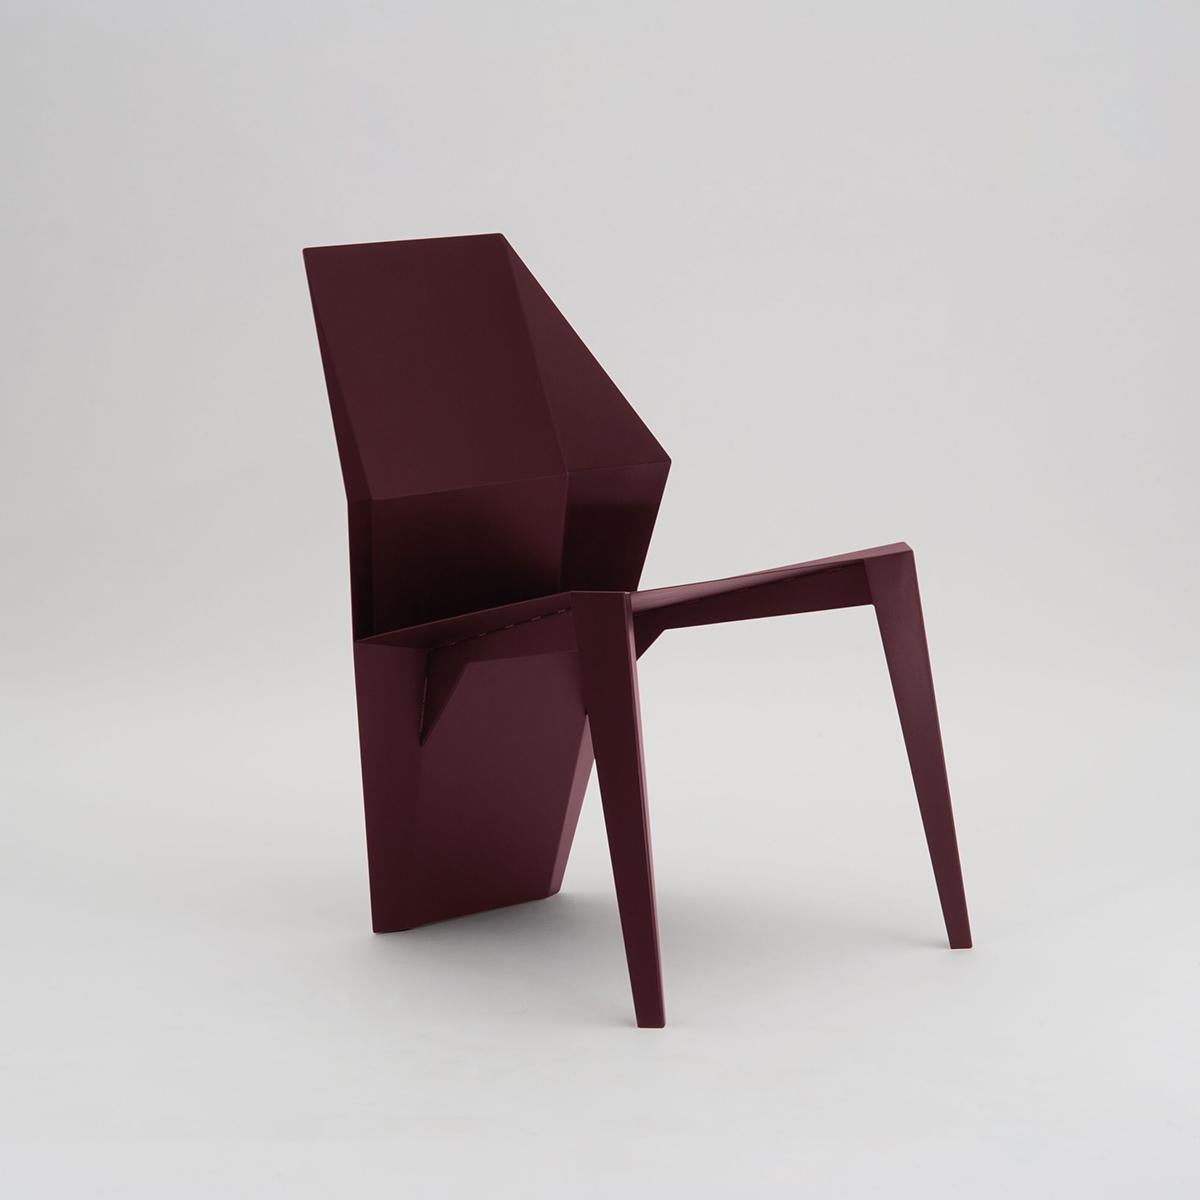 Contemporary Centaurus Sculptural Chair with soft-touch powder coated finish